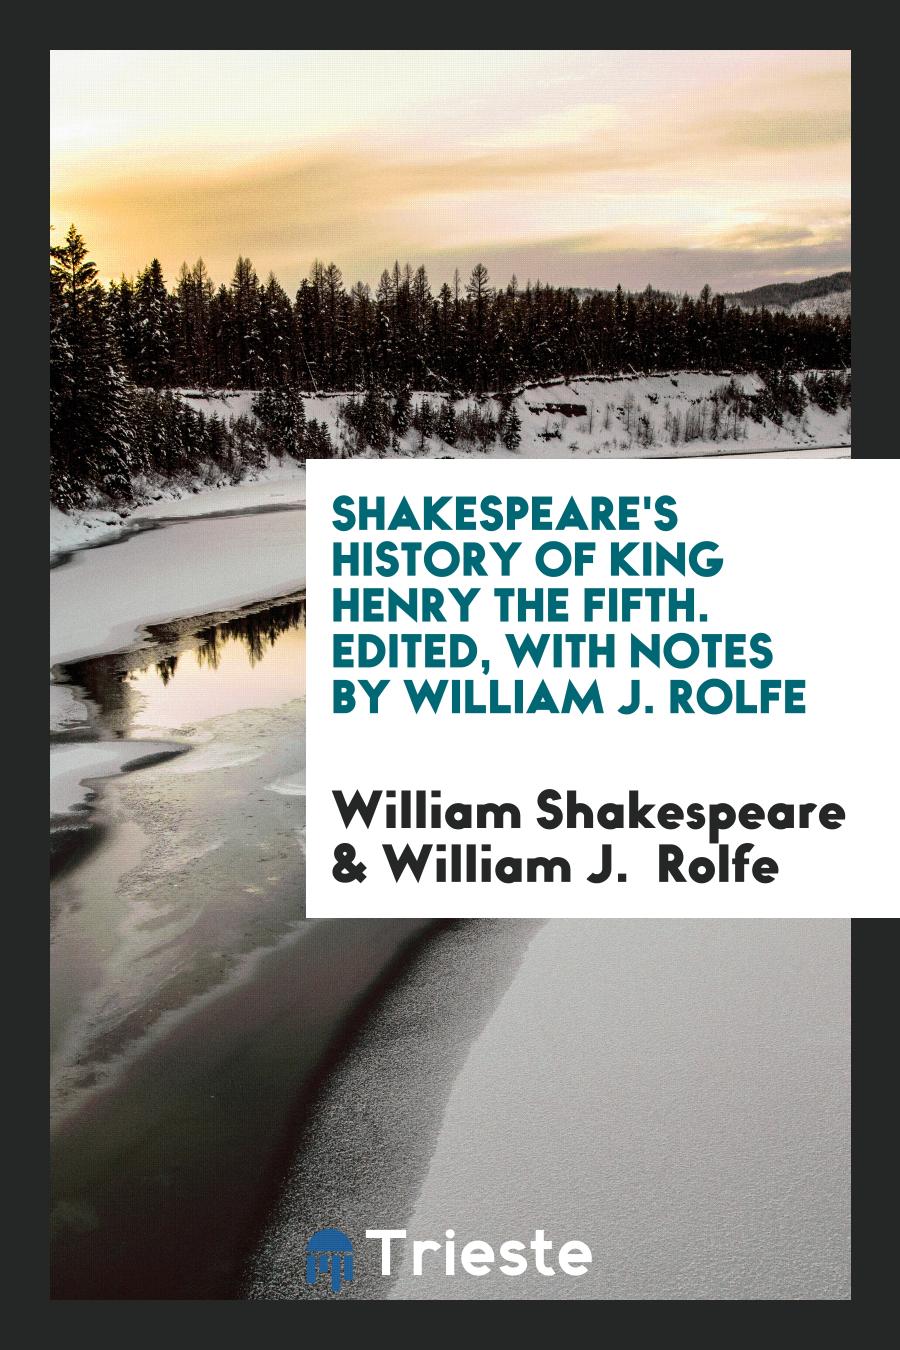 Shakespeare's History of King Henry the Fifth. Edited, with Notes by William J. Rolfe